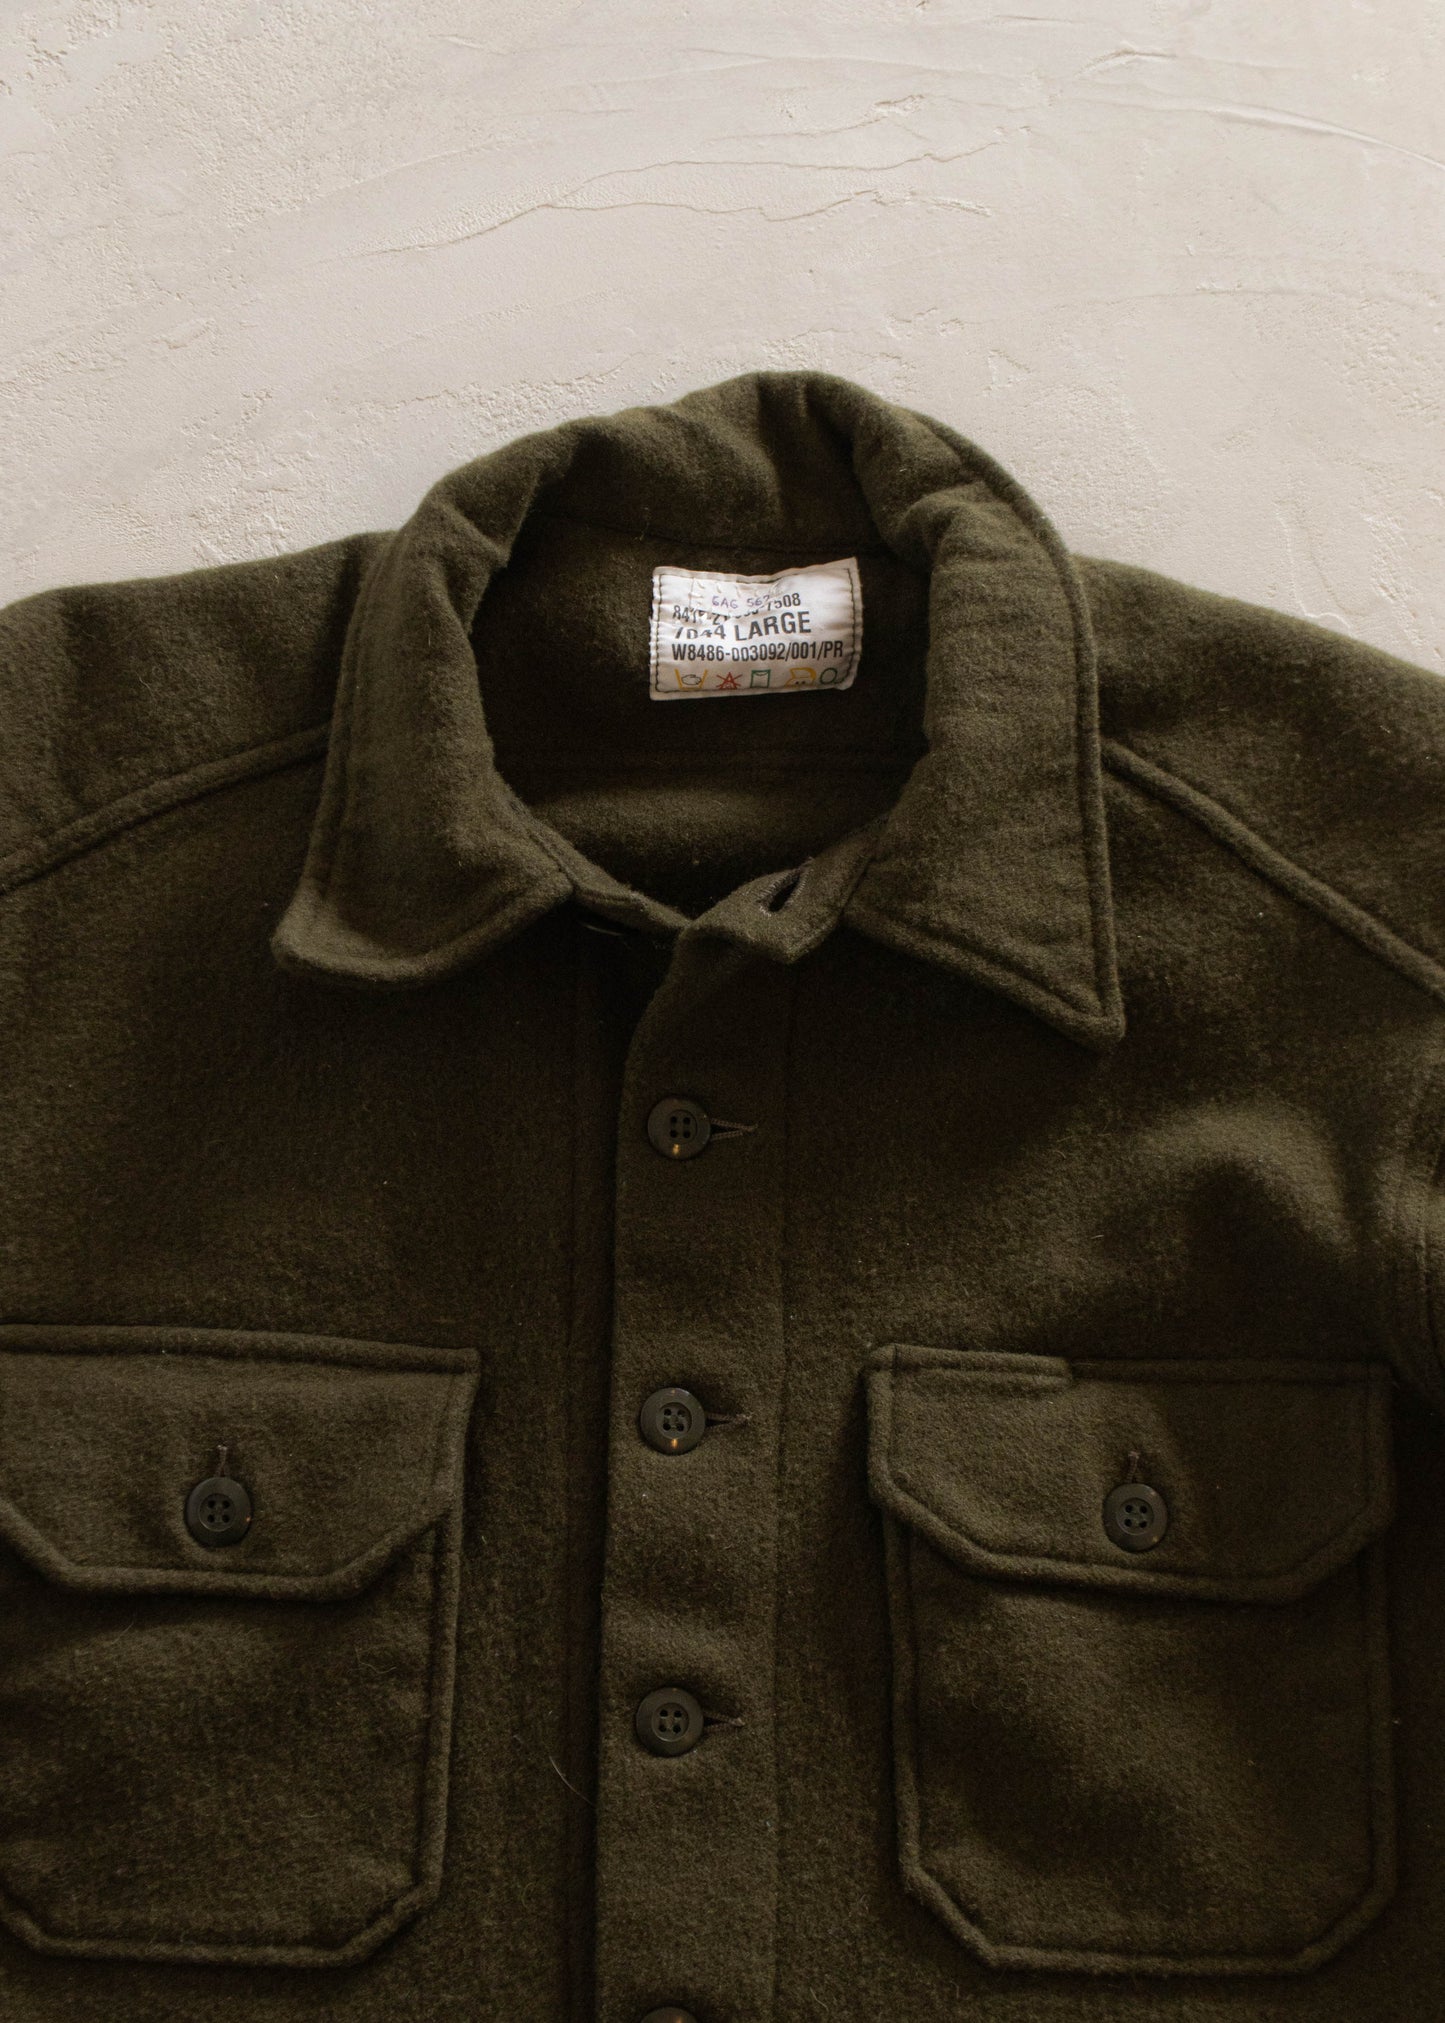 1980s Military Wool Button Up Shirt Size L/XL